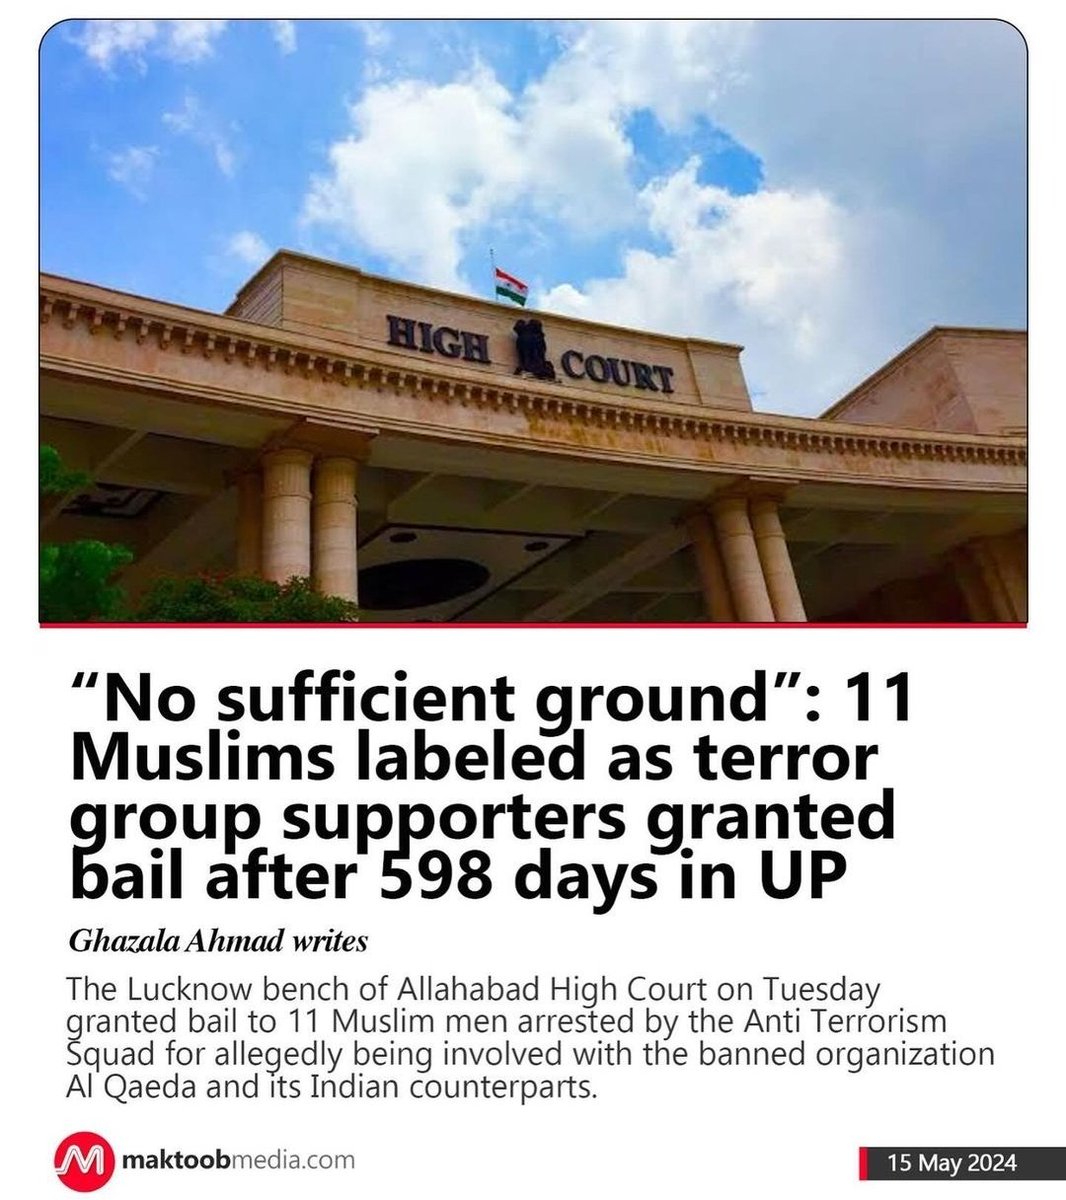 'No Sufficient Ground' 11 Muslims labelled as terror group supporters granted bail after 598 days in UP.